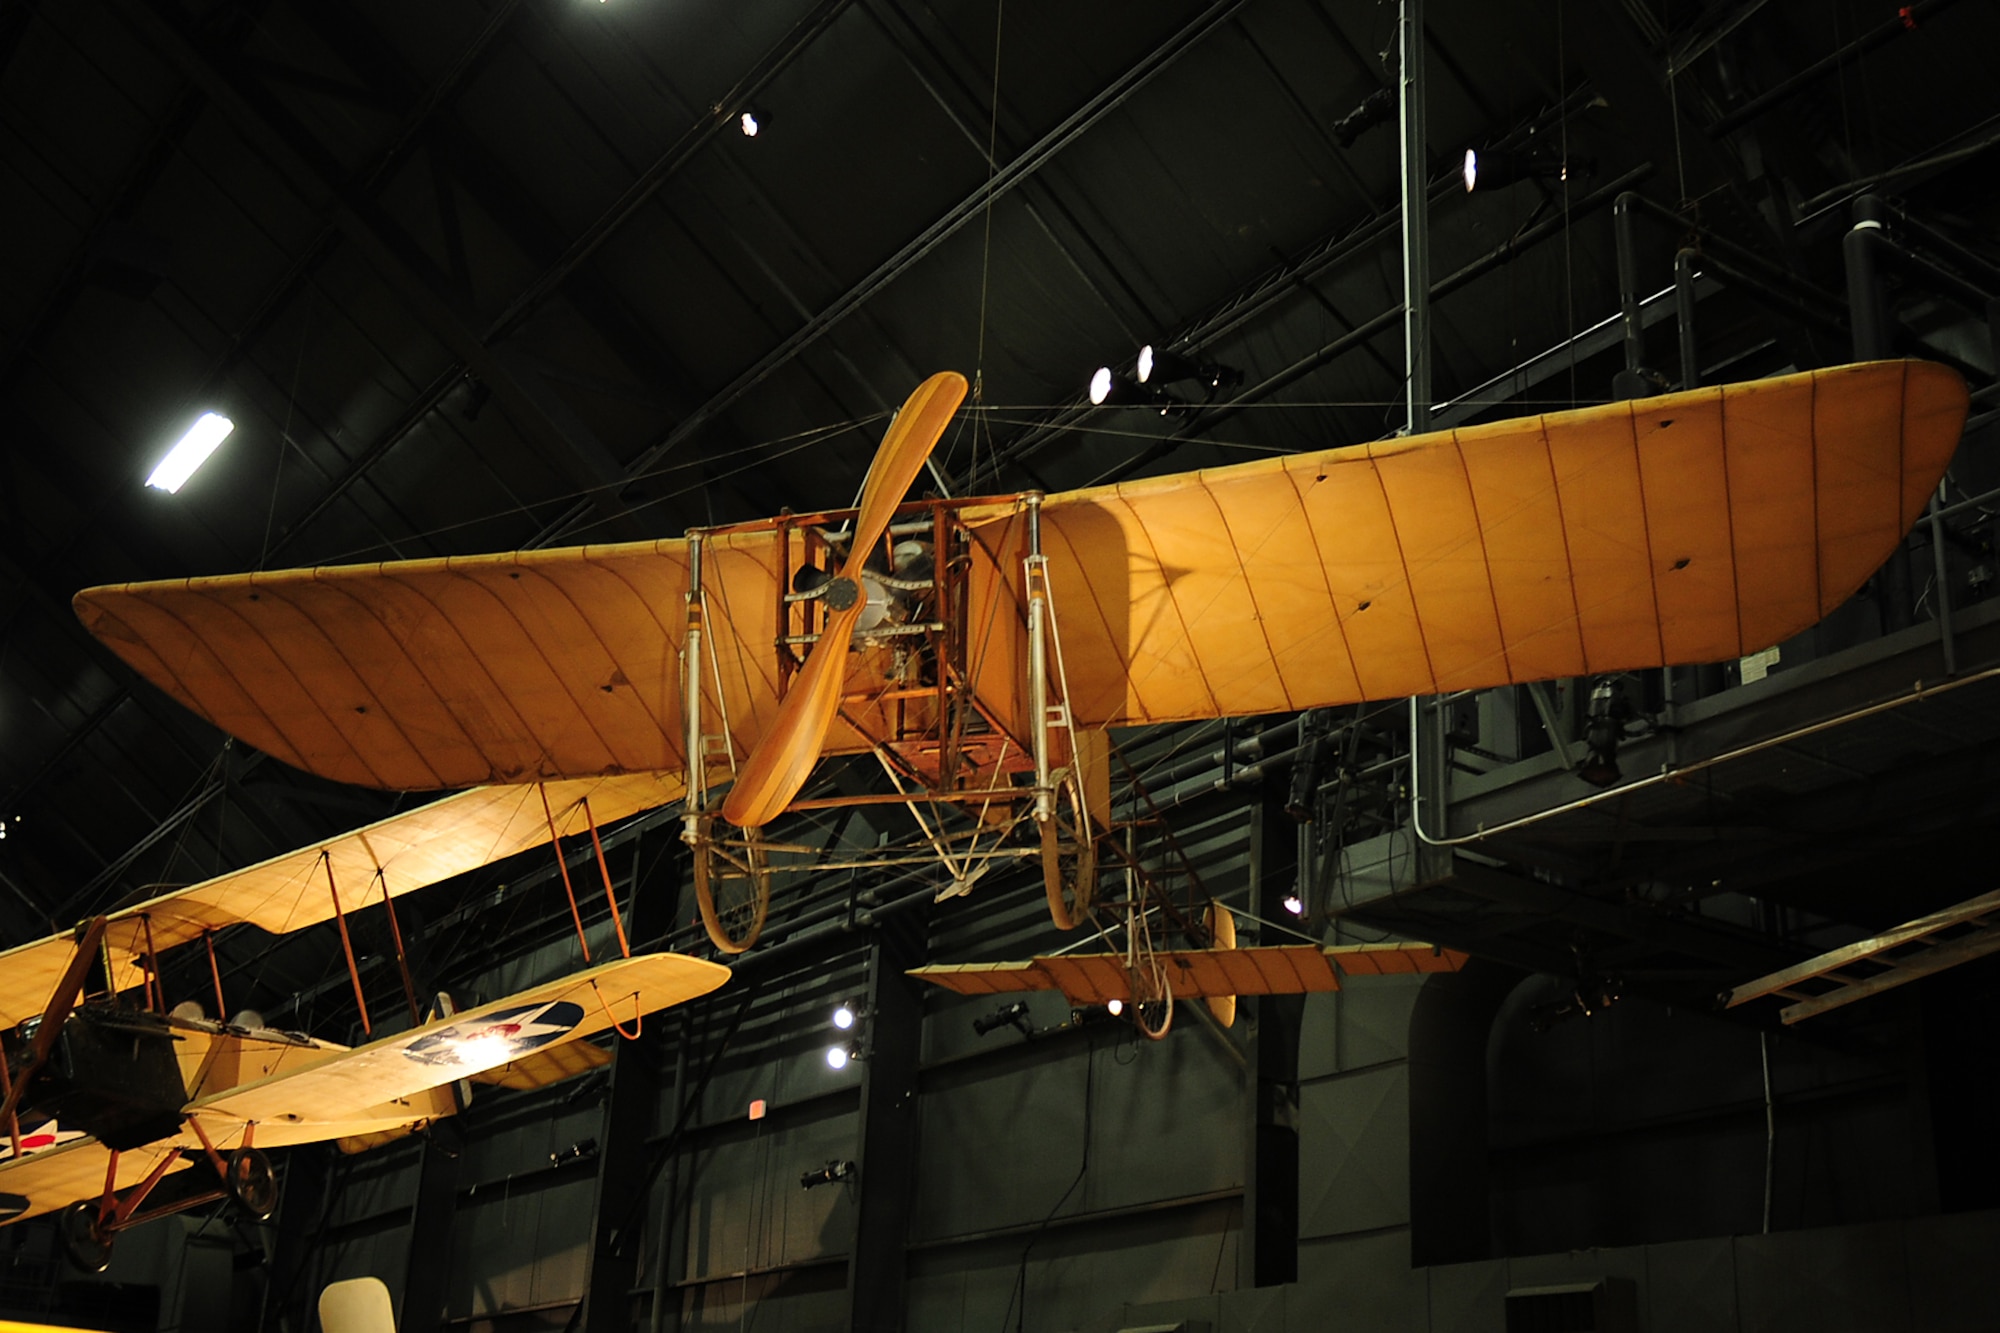 DAYTON, Ohio -- Bleriot Monoplane in the Early Years Gallery at the National Museum of the United States Air Force. (U.S. Air Force photo) 